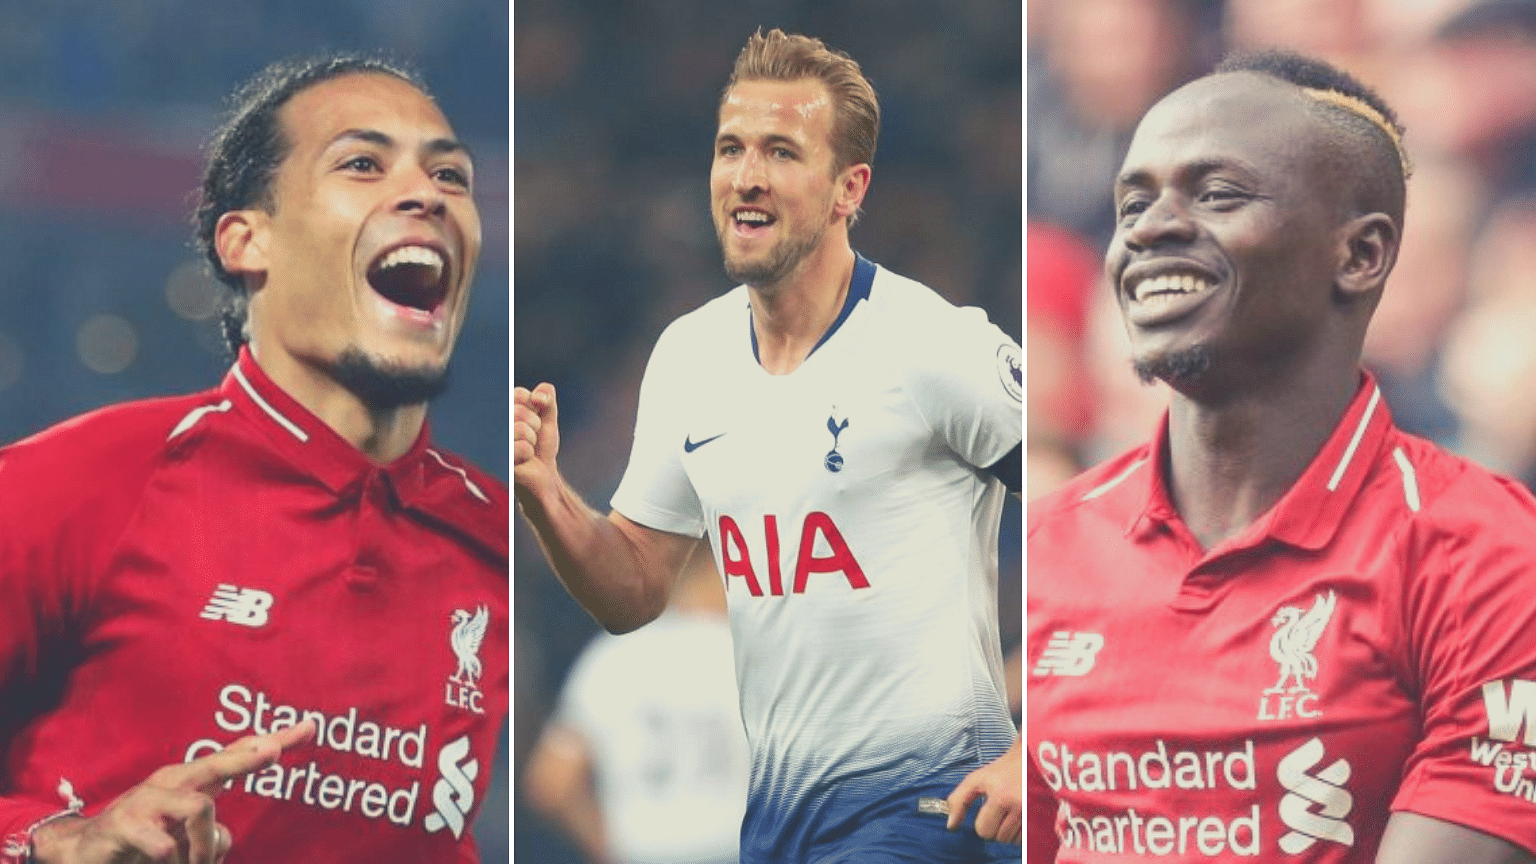 From left to right: Virgil van Dijk, Harry Kane and Sadio Mane